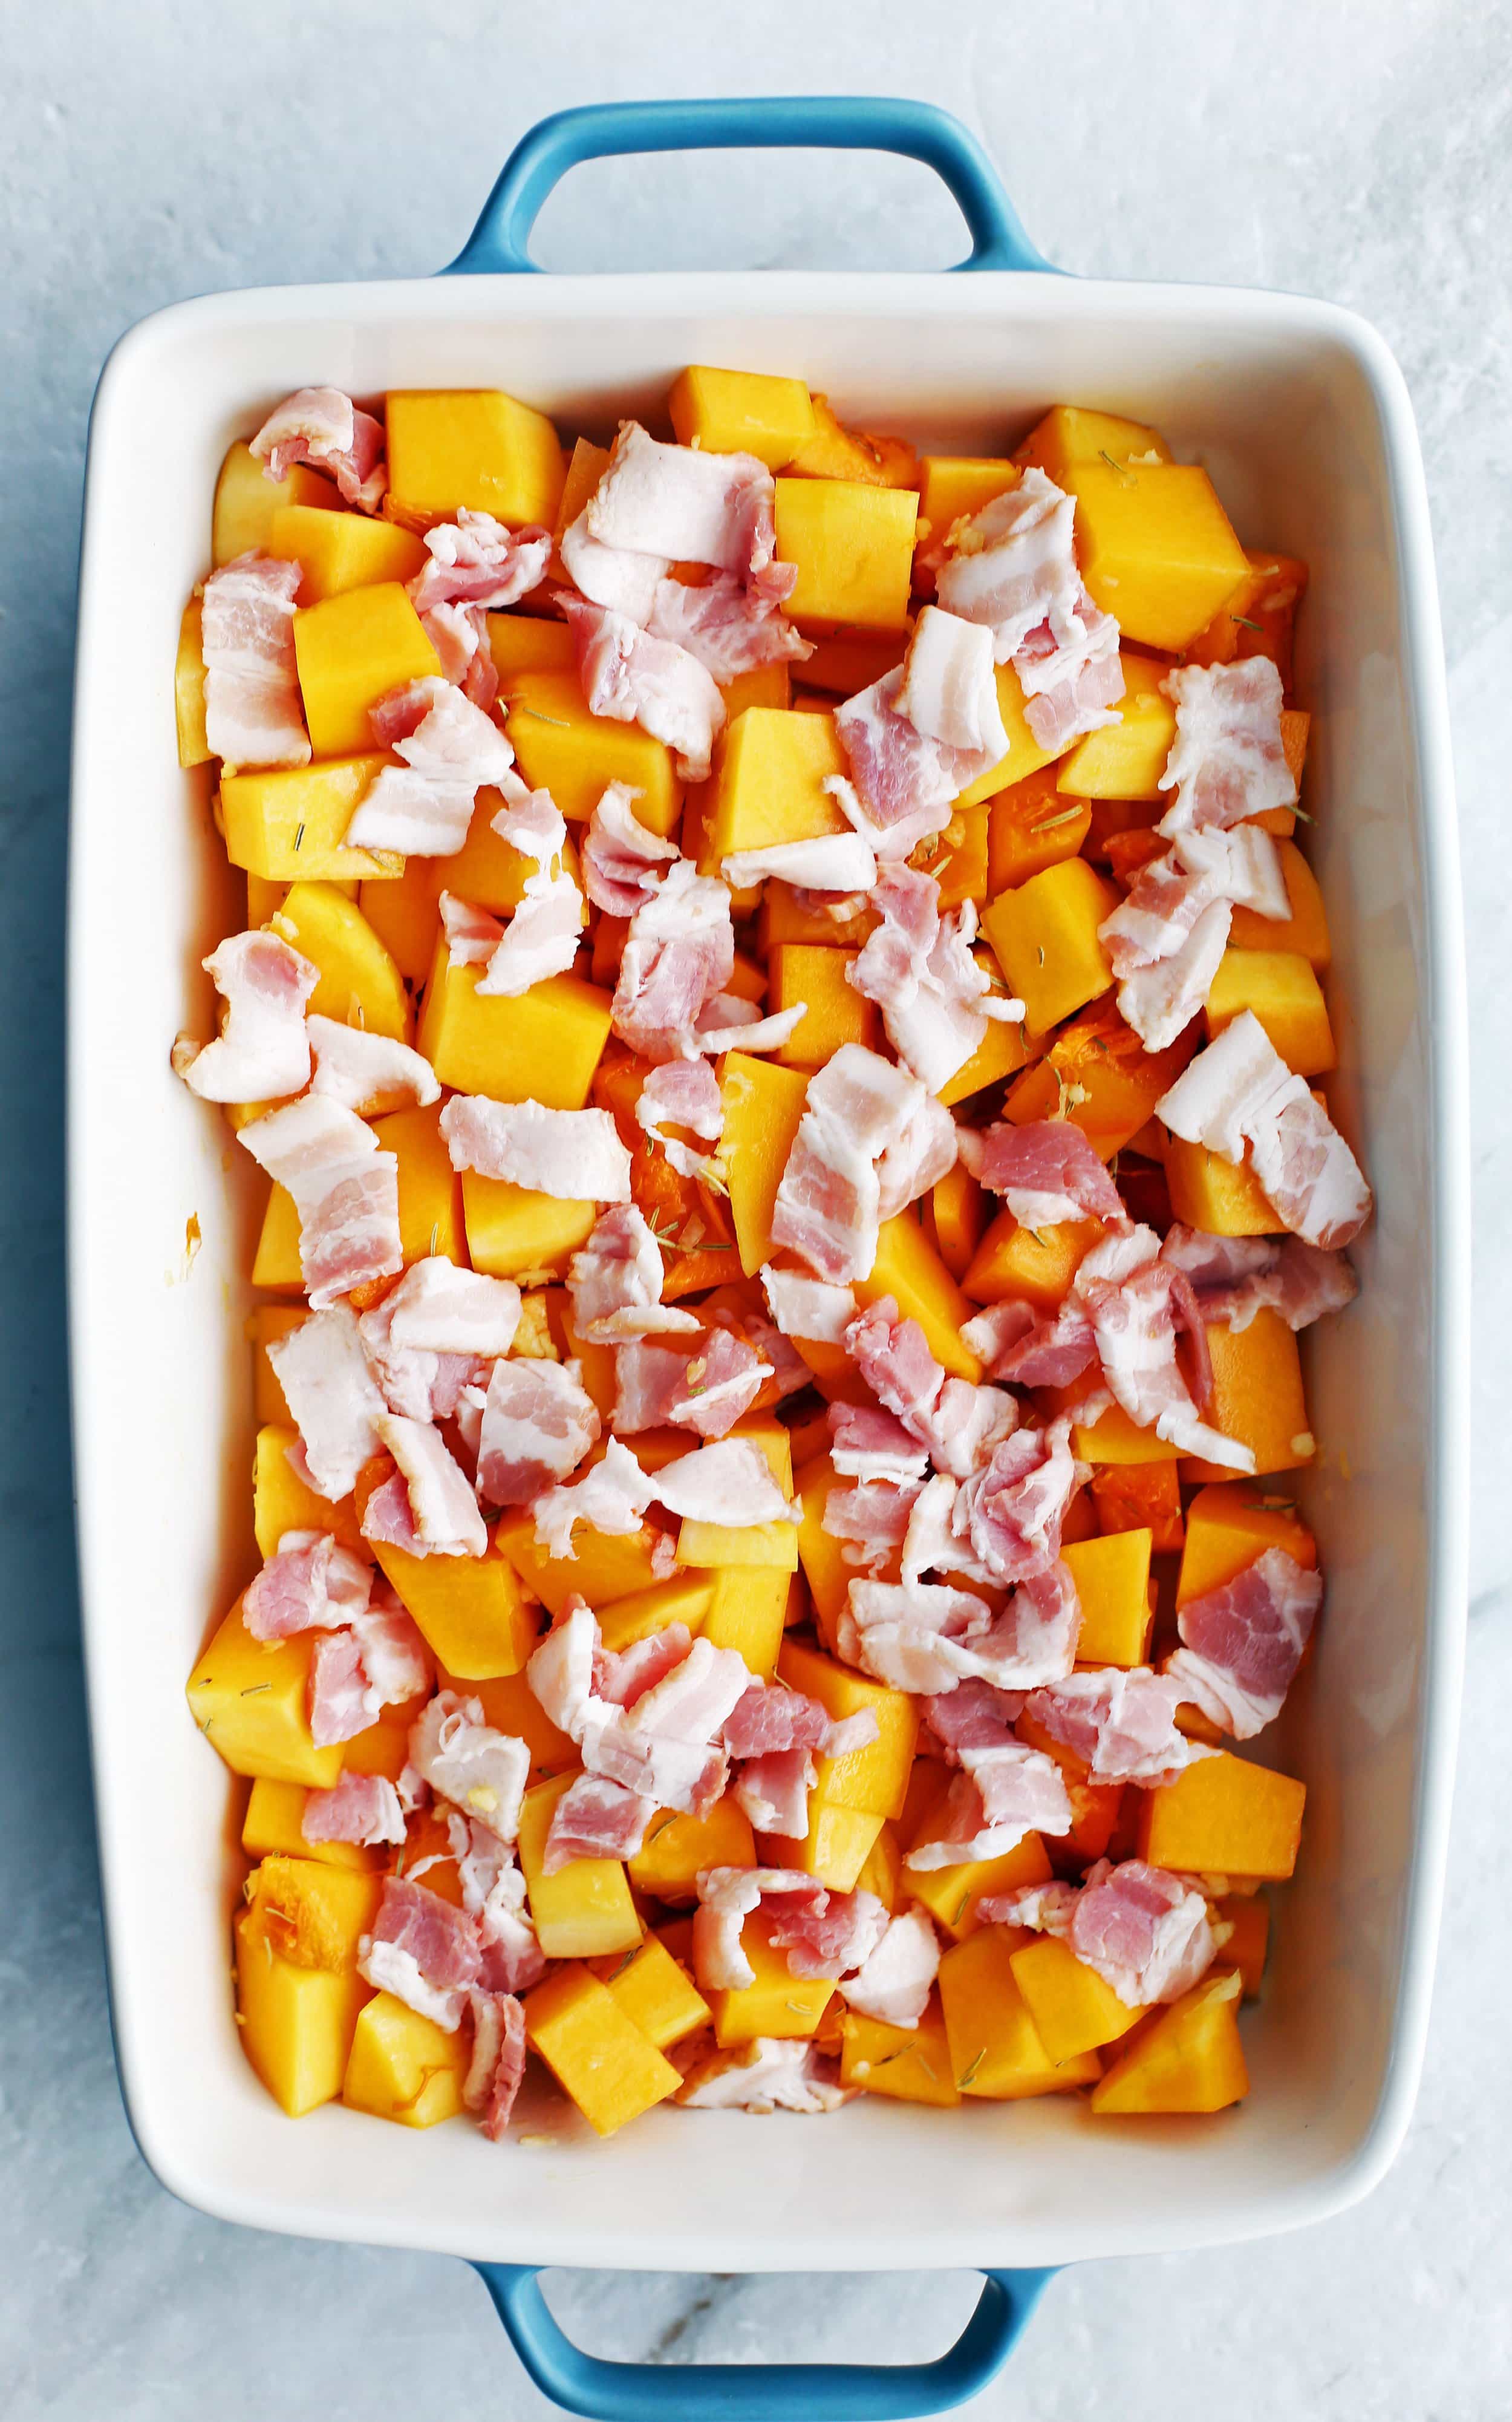 Seasoned chopped butternut squash in a baking dish that’s topped with chopped uncooked bacon.